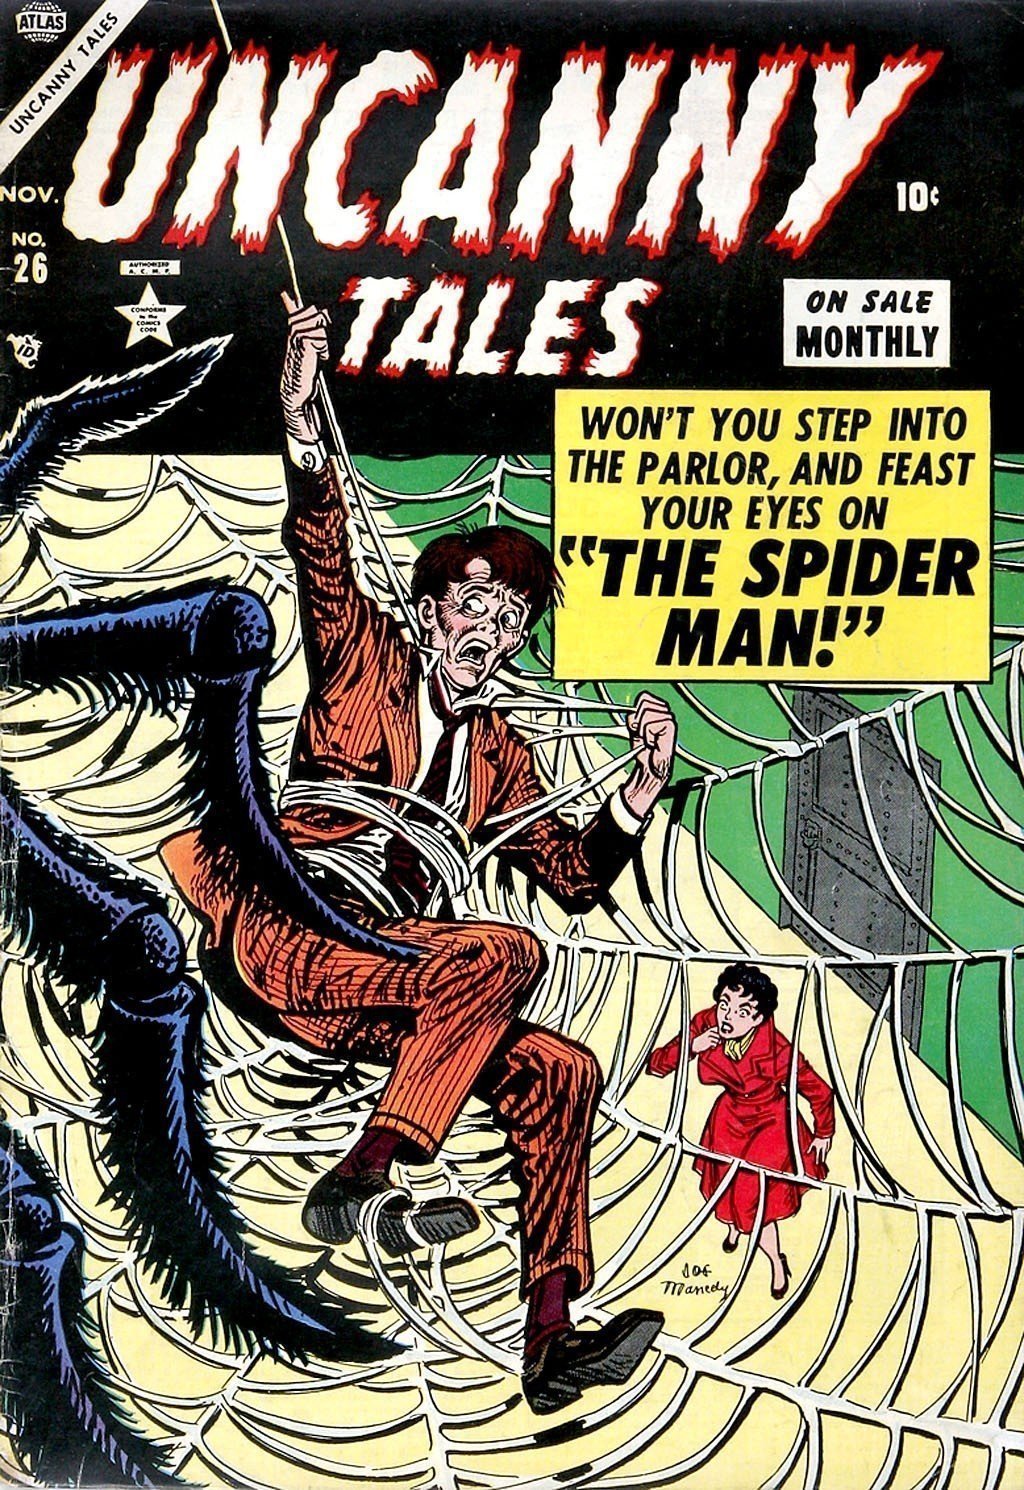 Image result for atlas comics the spider